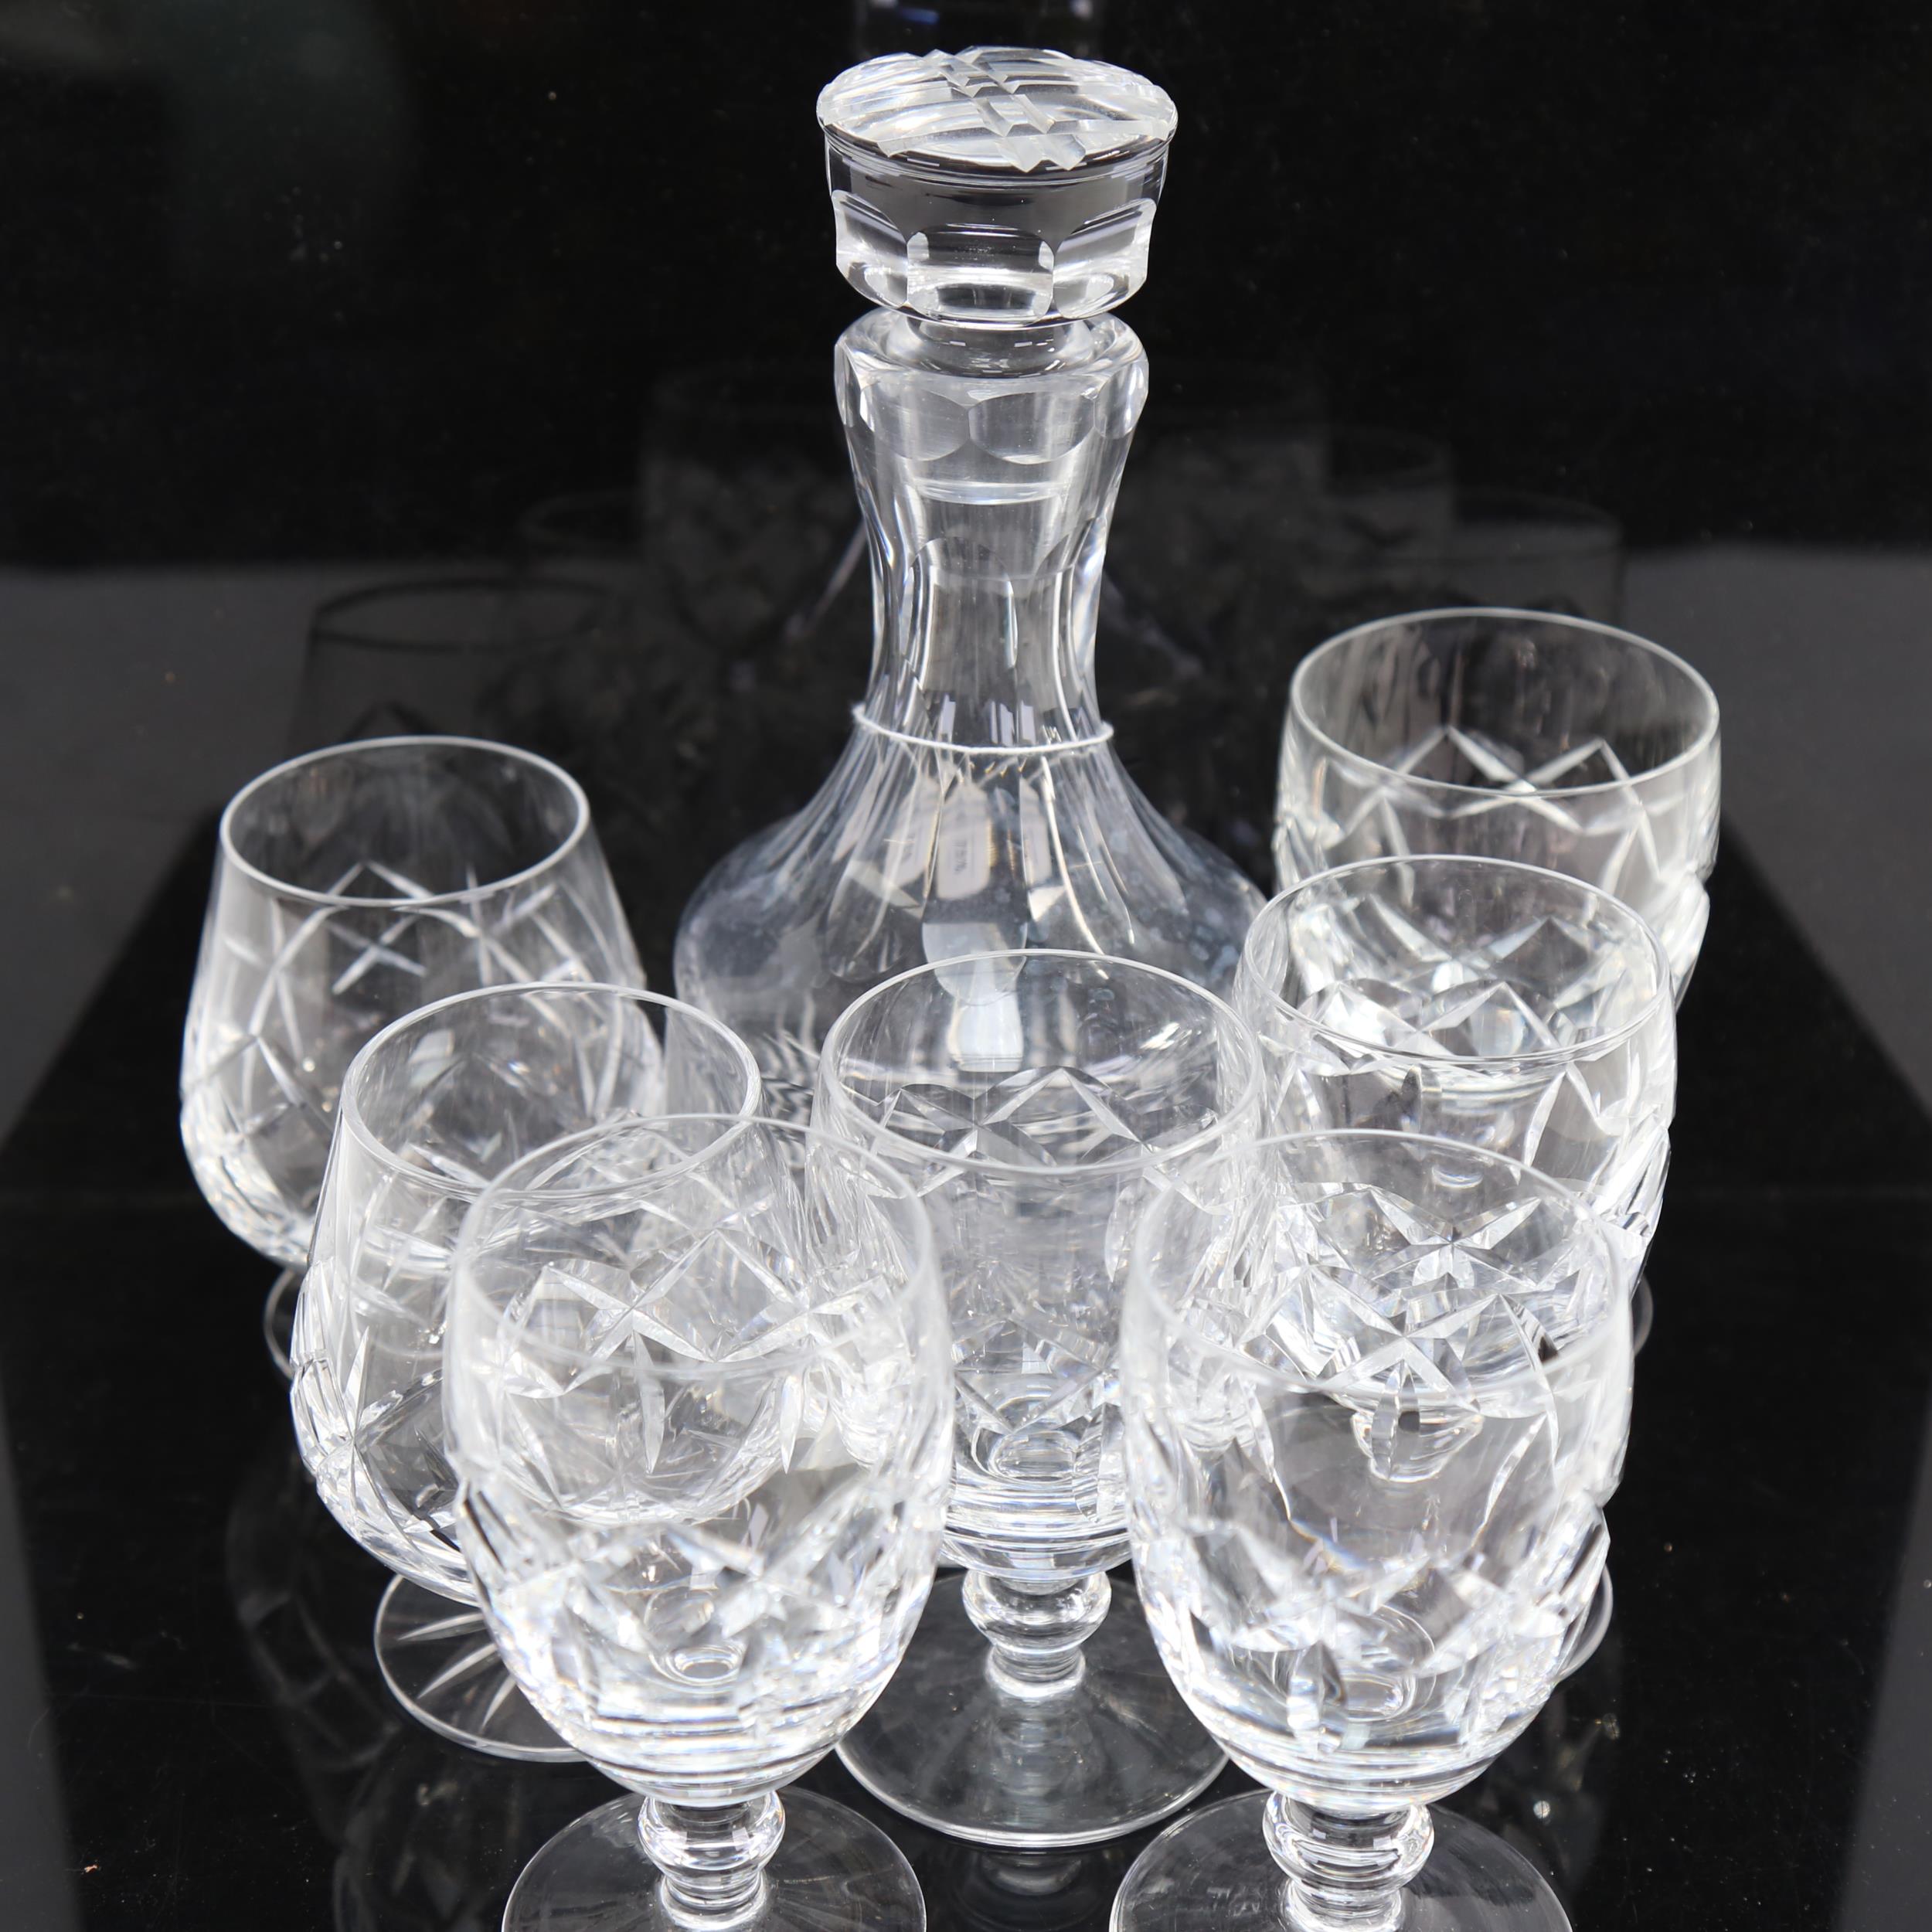 Waterford Crystal decanter and stopper, height 26cm, a pair of matching Brandy balloons, and 5